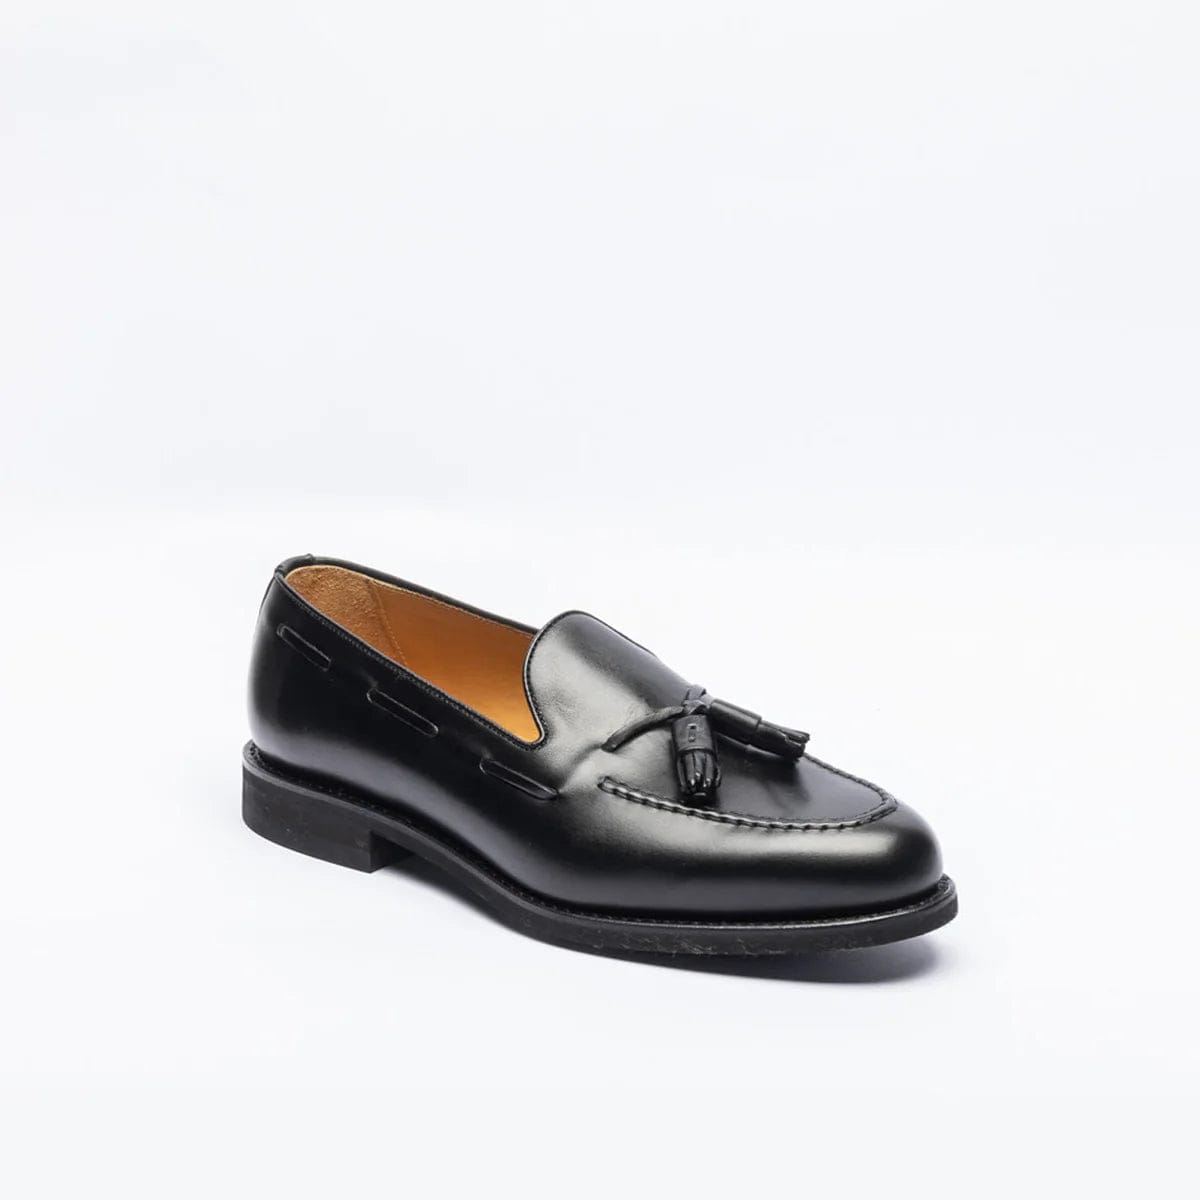 1707 Tassel Loafer In Black Leather With Rubber Sole